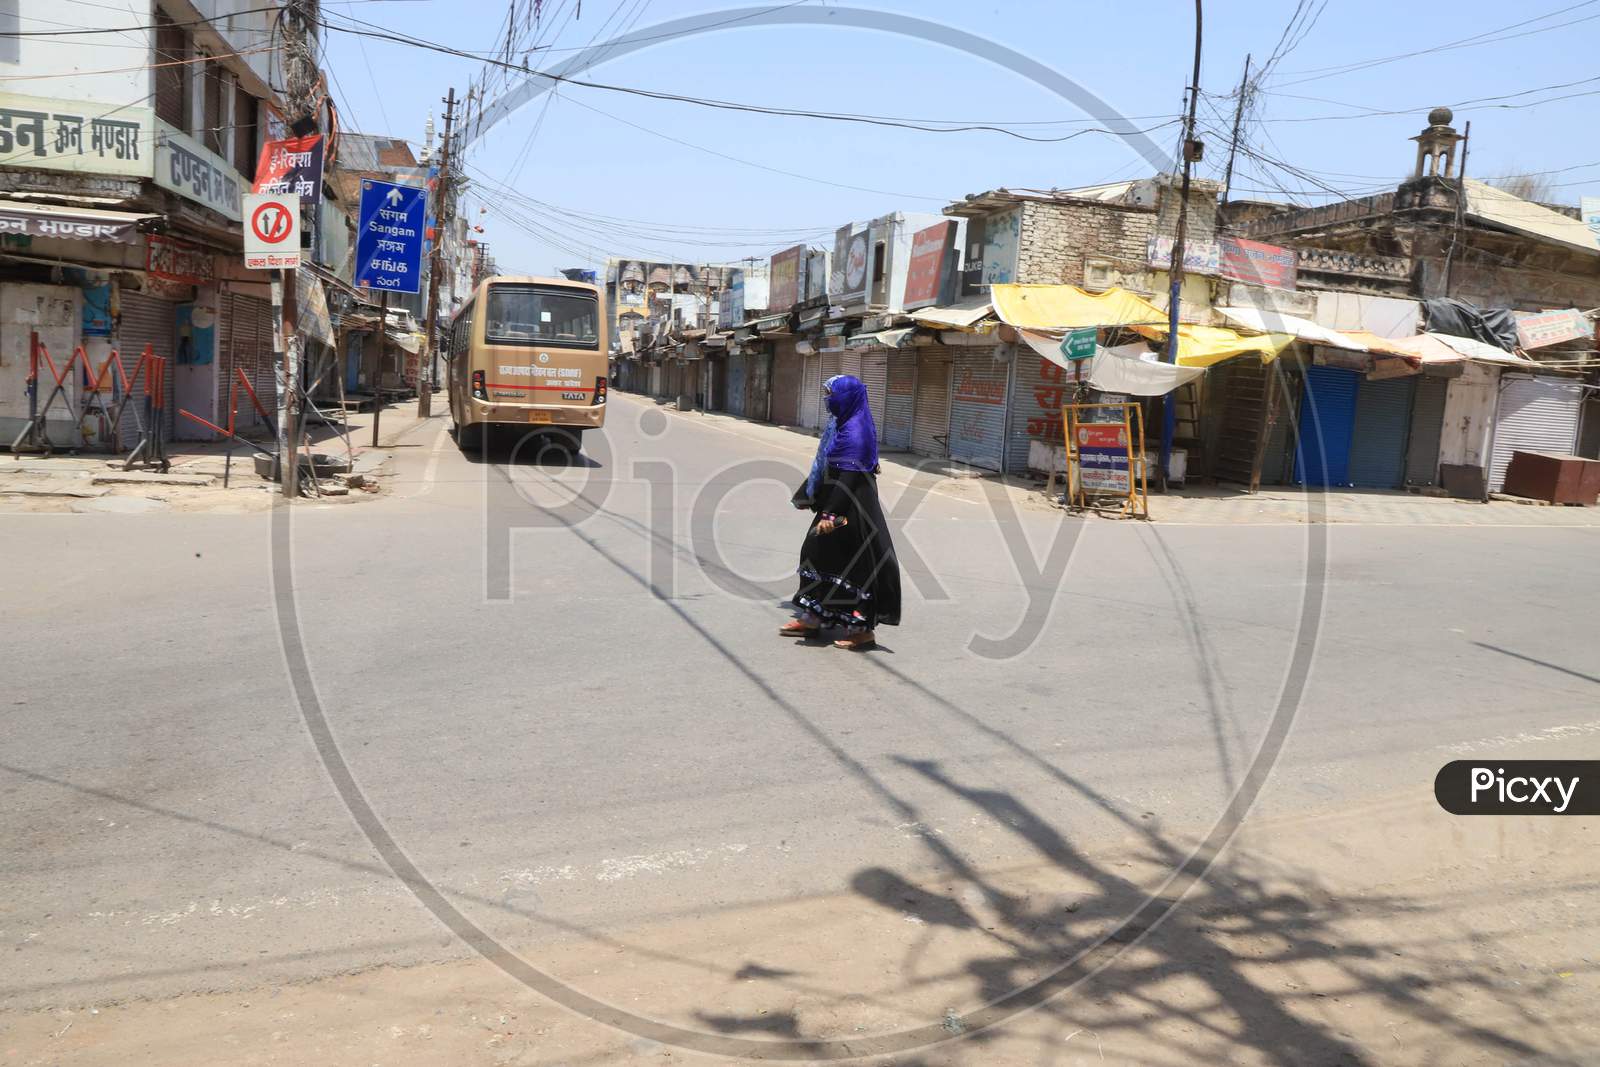 Muslim Women Walk On The Empty Road During A Nationwide Lockdown To Slow The Spreading Of The Coronavirus Disease (Covid-19), In Prayagraj, April, 18, 2020.